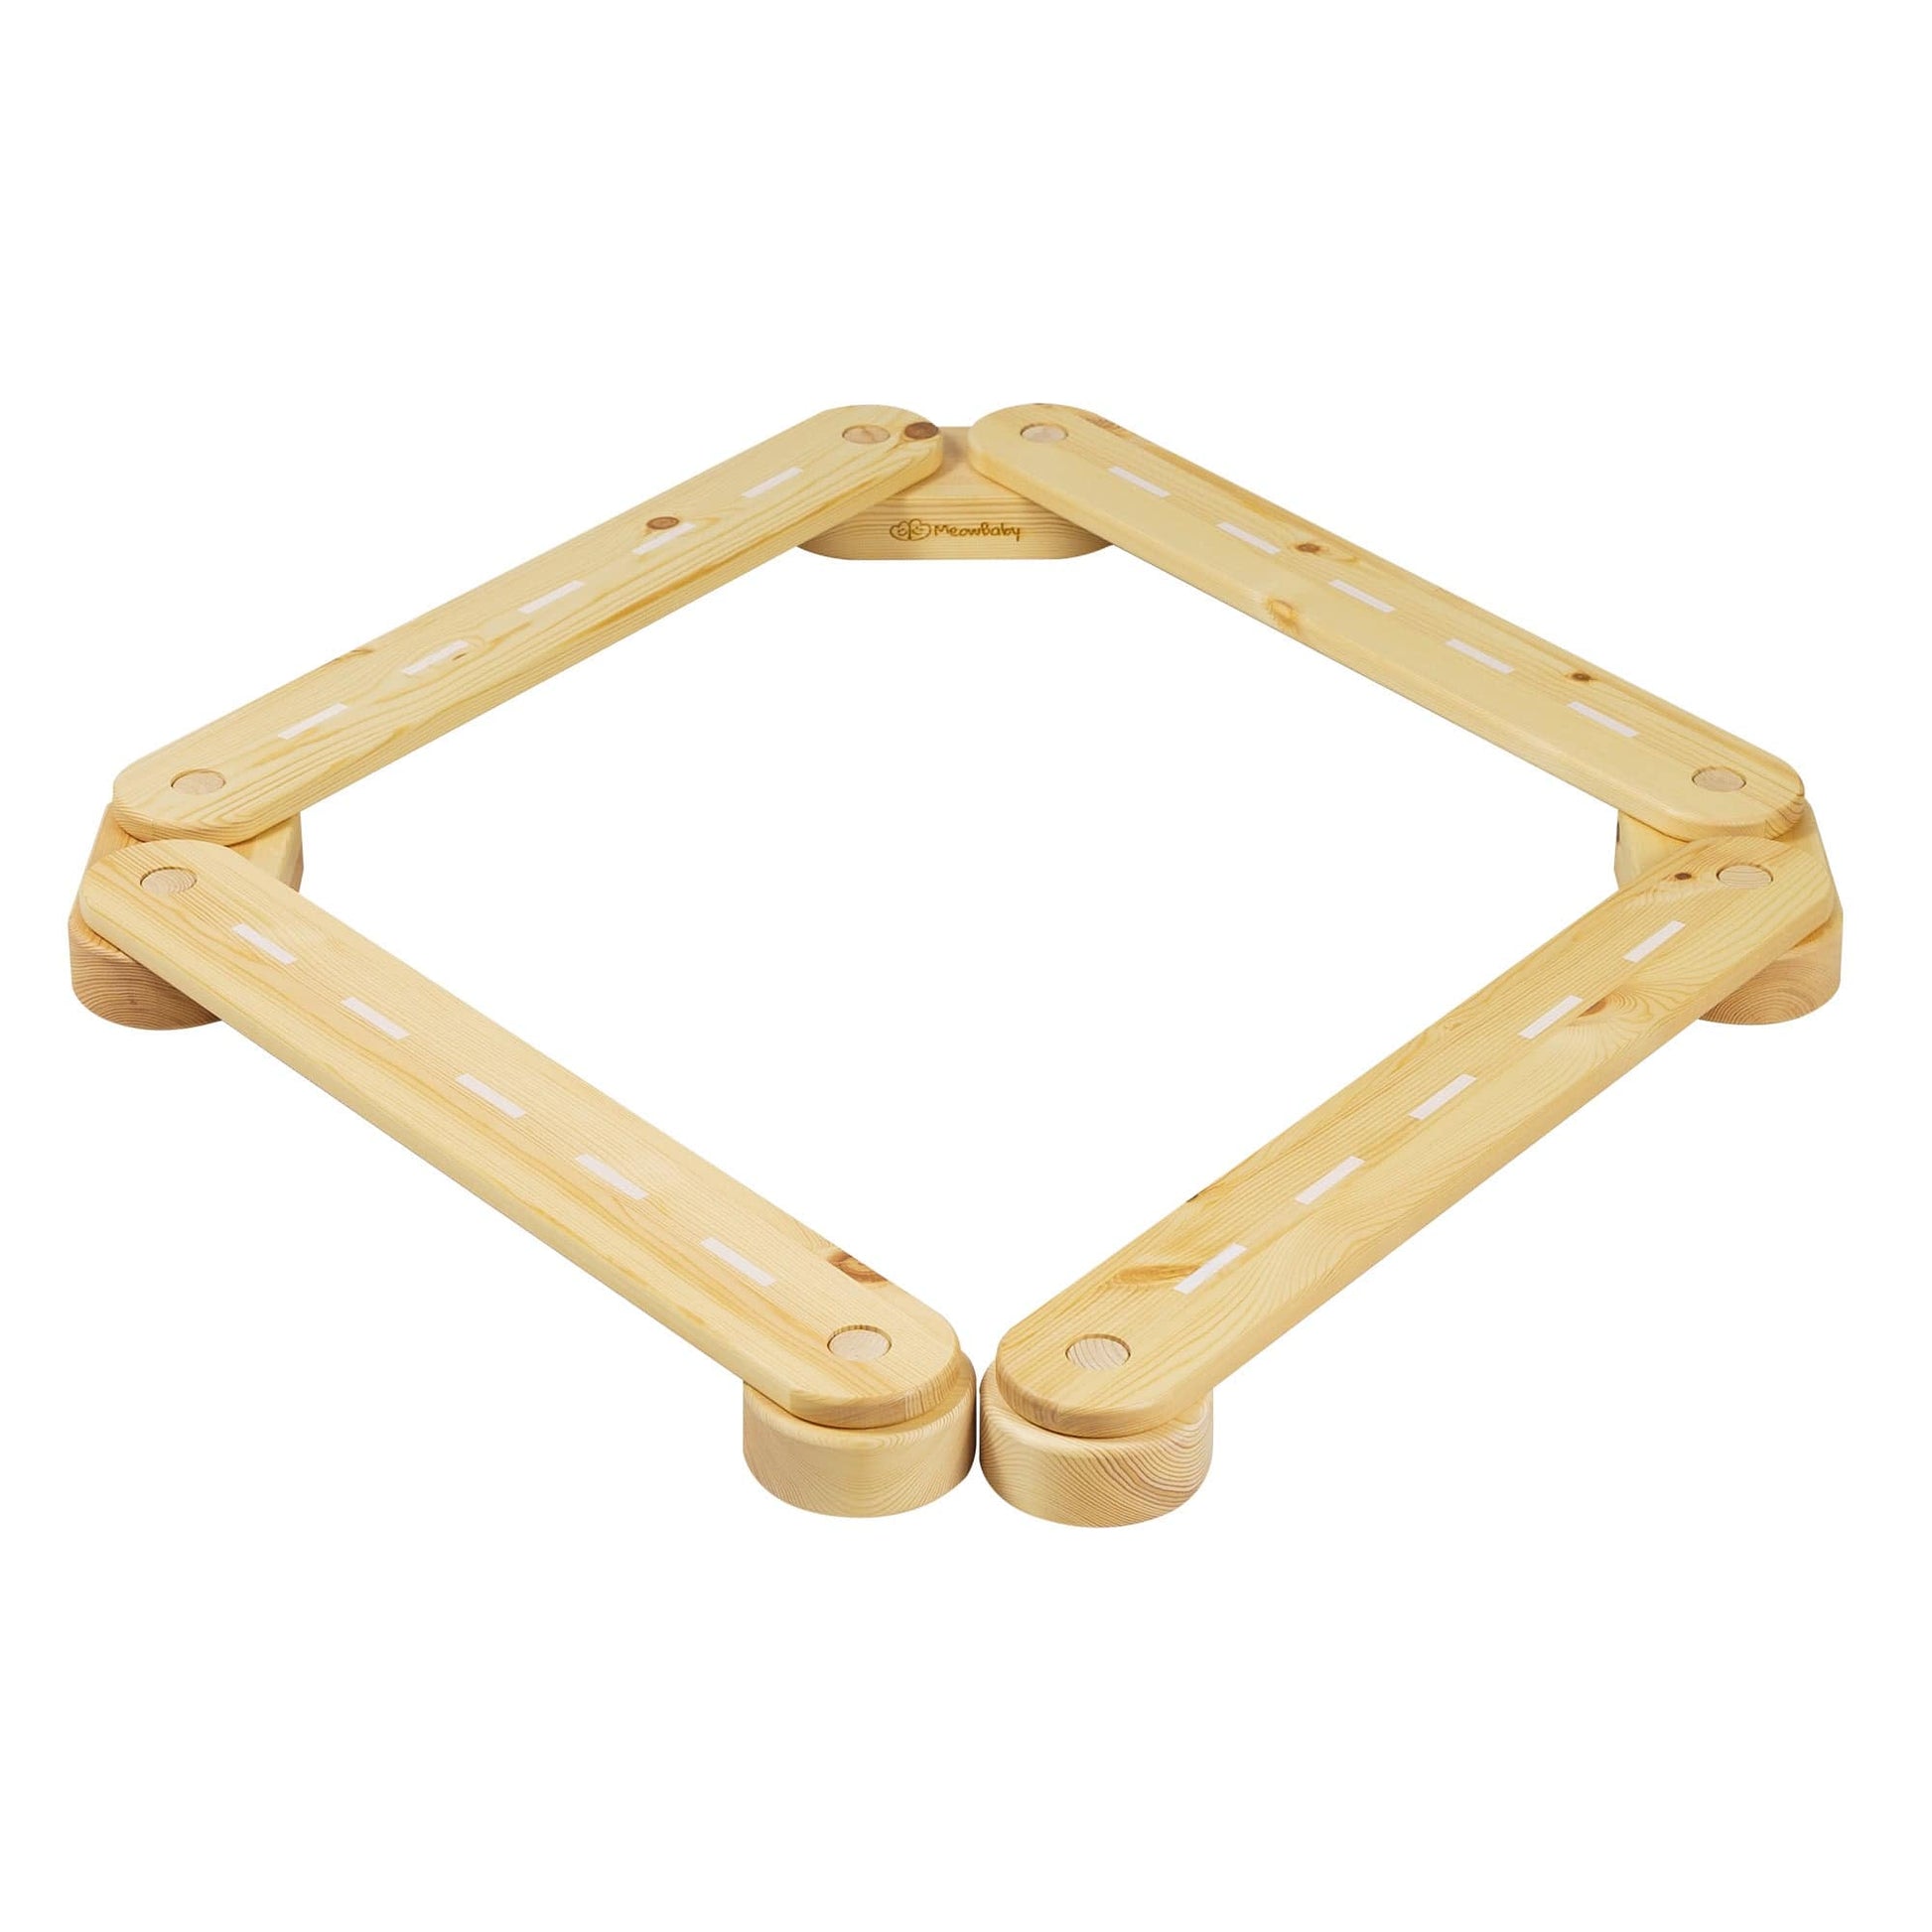 Wooden Balance Bream For Kids By Meowbaby - 4 Elements Natural